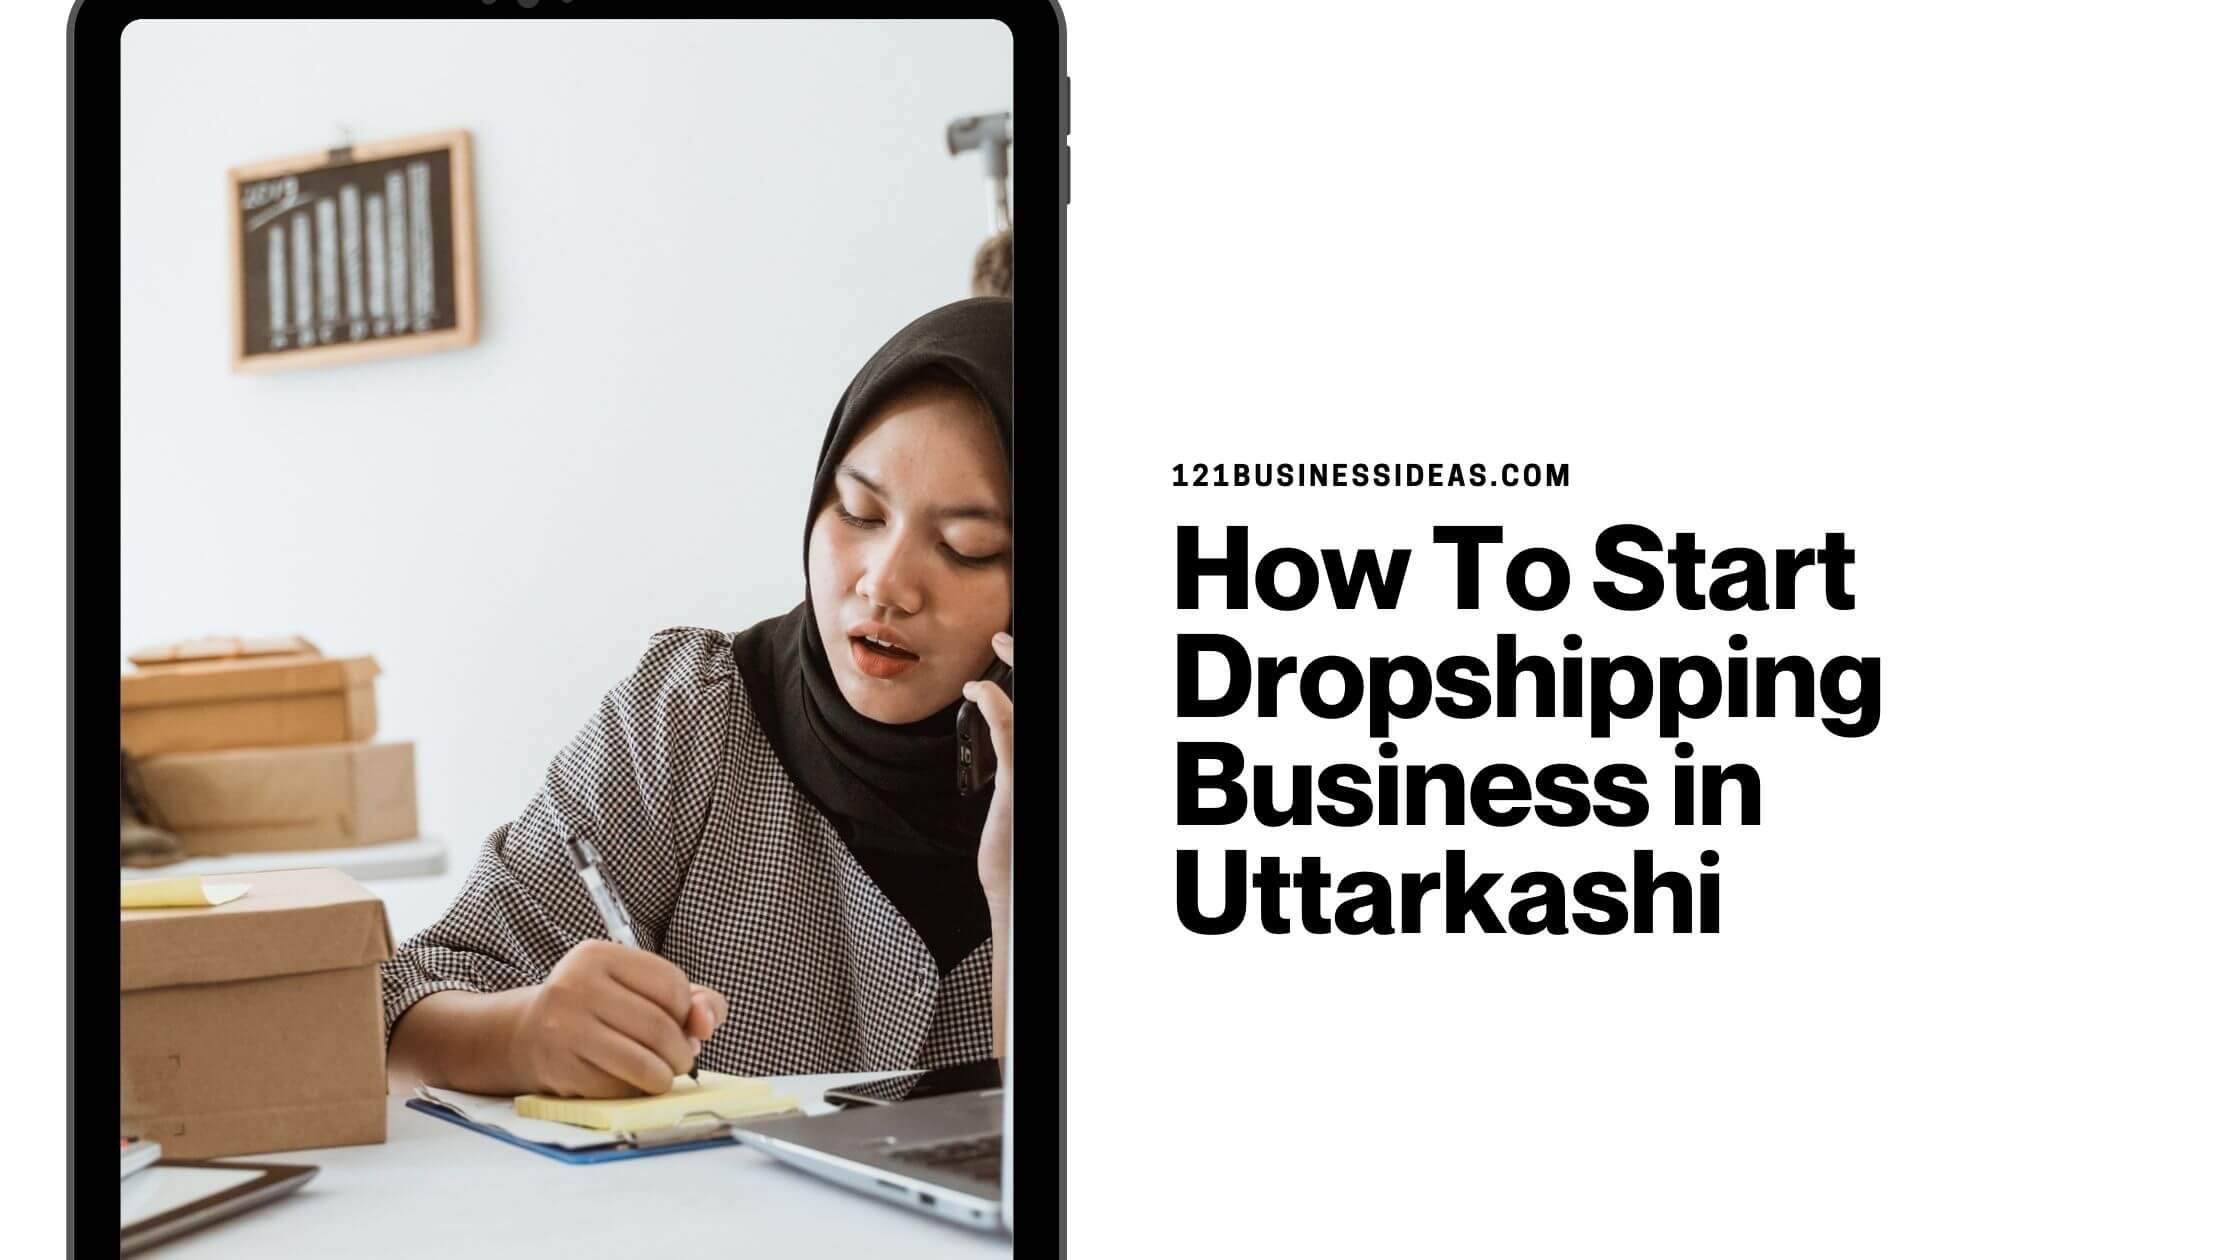 _How To Start Dropshipping Business in Uttarkashi (1)